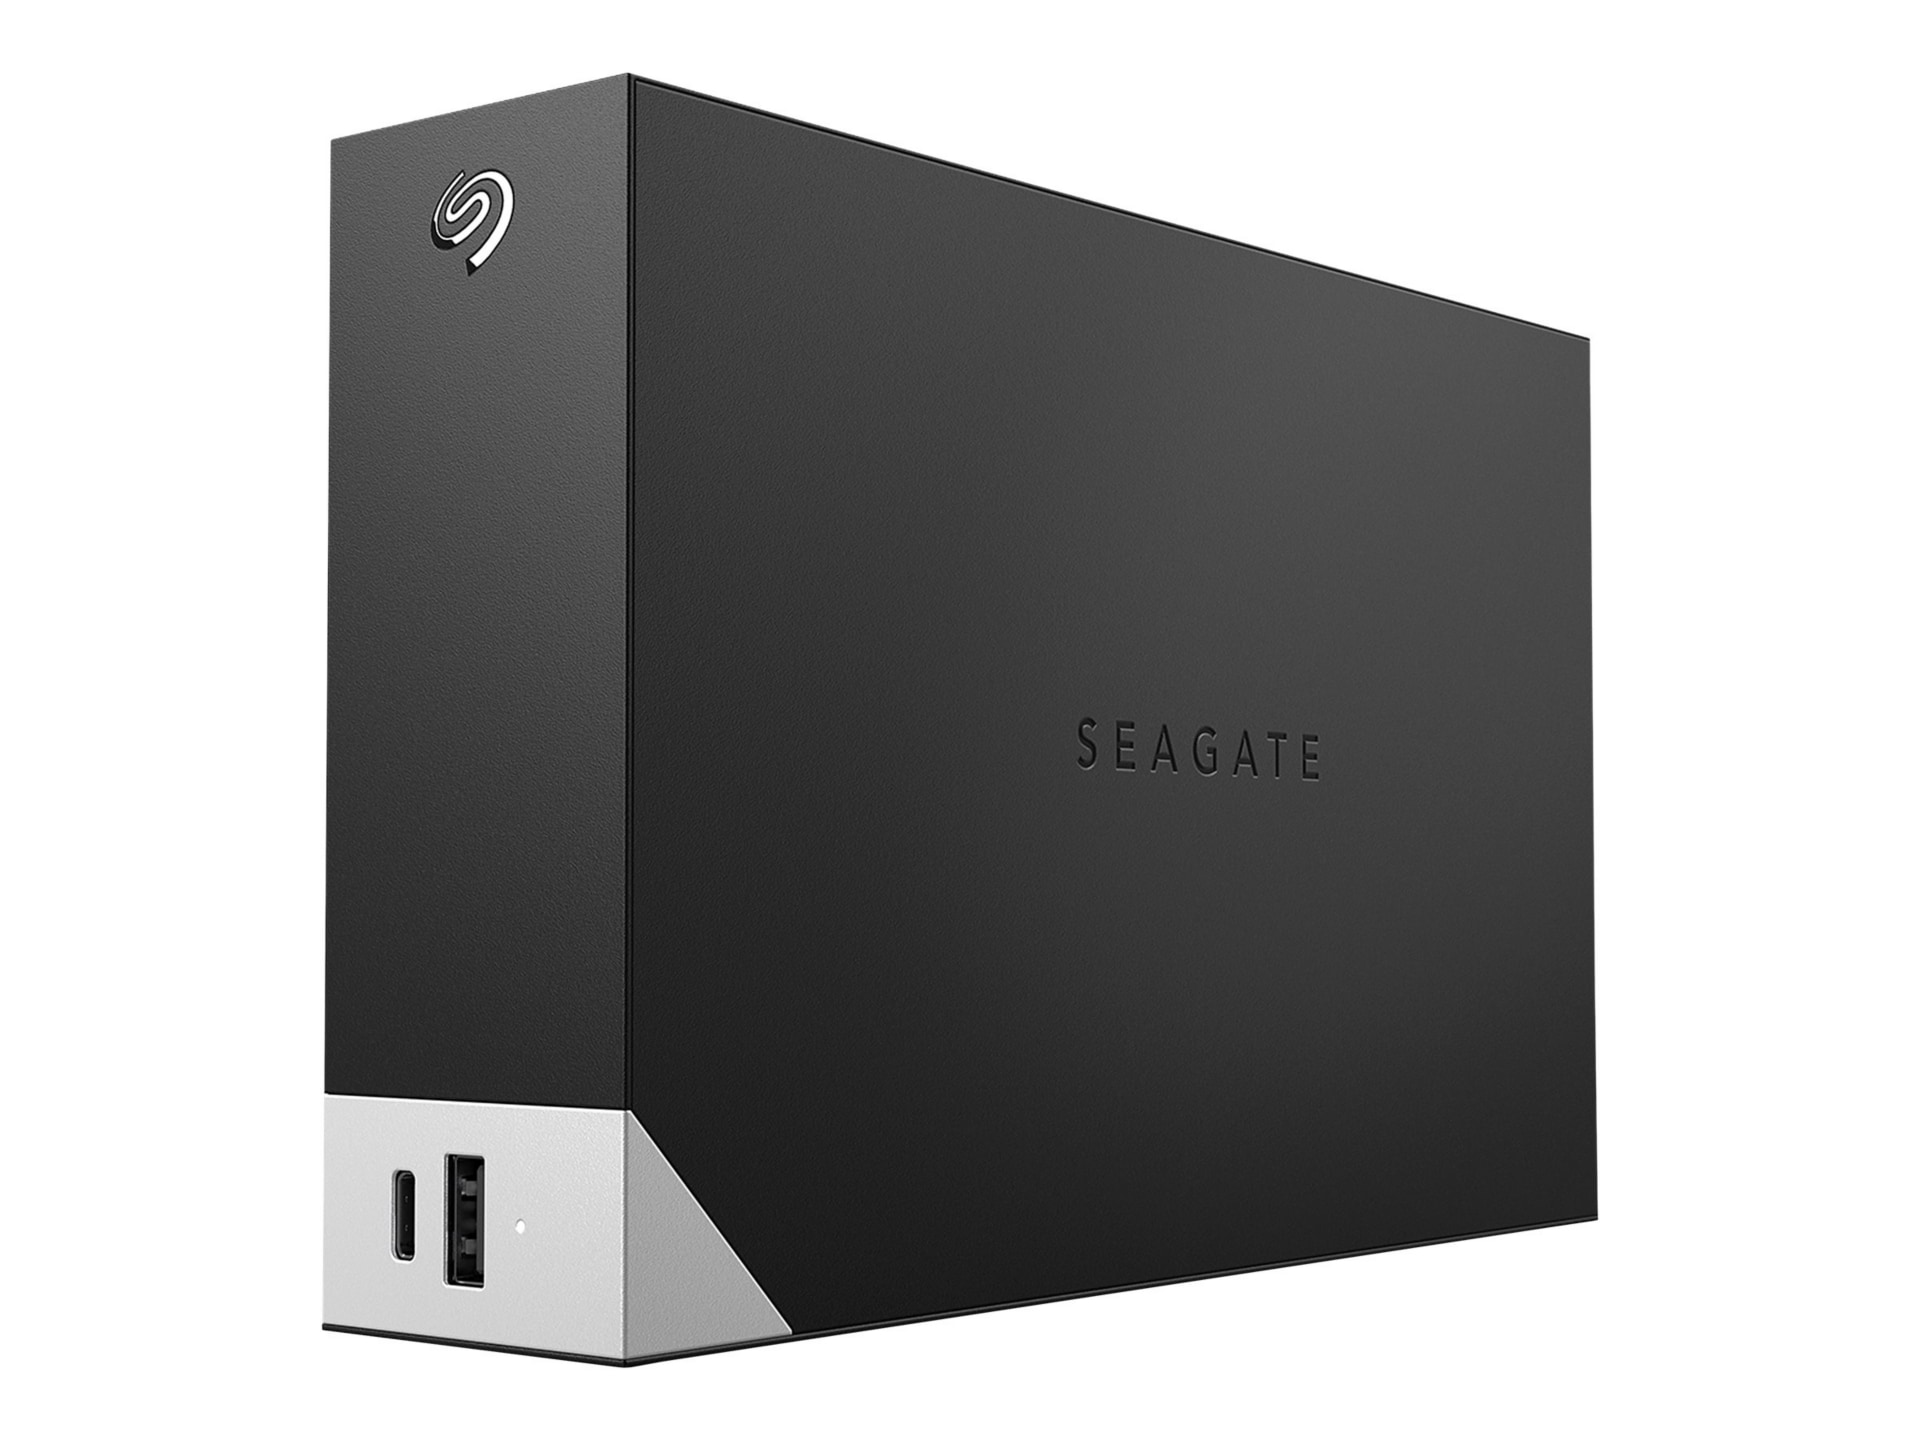 Seagate One Touch with hub STLC4000400 - hard drive - 4 TB - USB 3.0